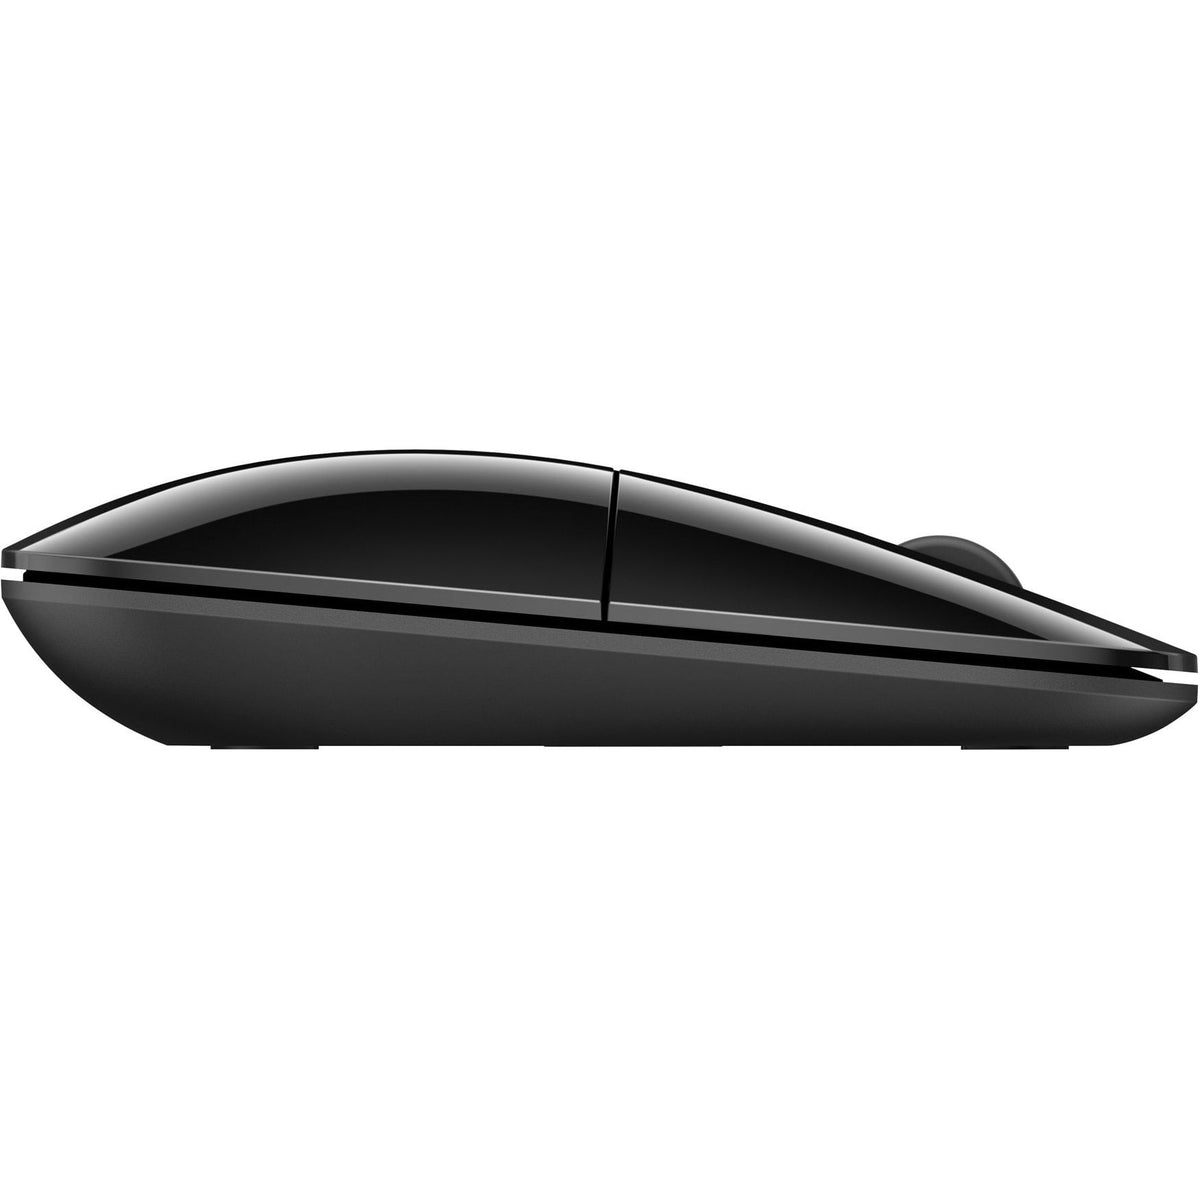 HP Z3700 Wireless Mouse - Black Onyx | V0L79AA#ABB from HP - DID Electrical